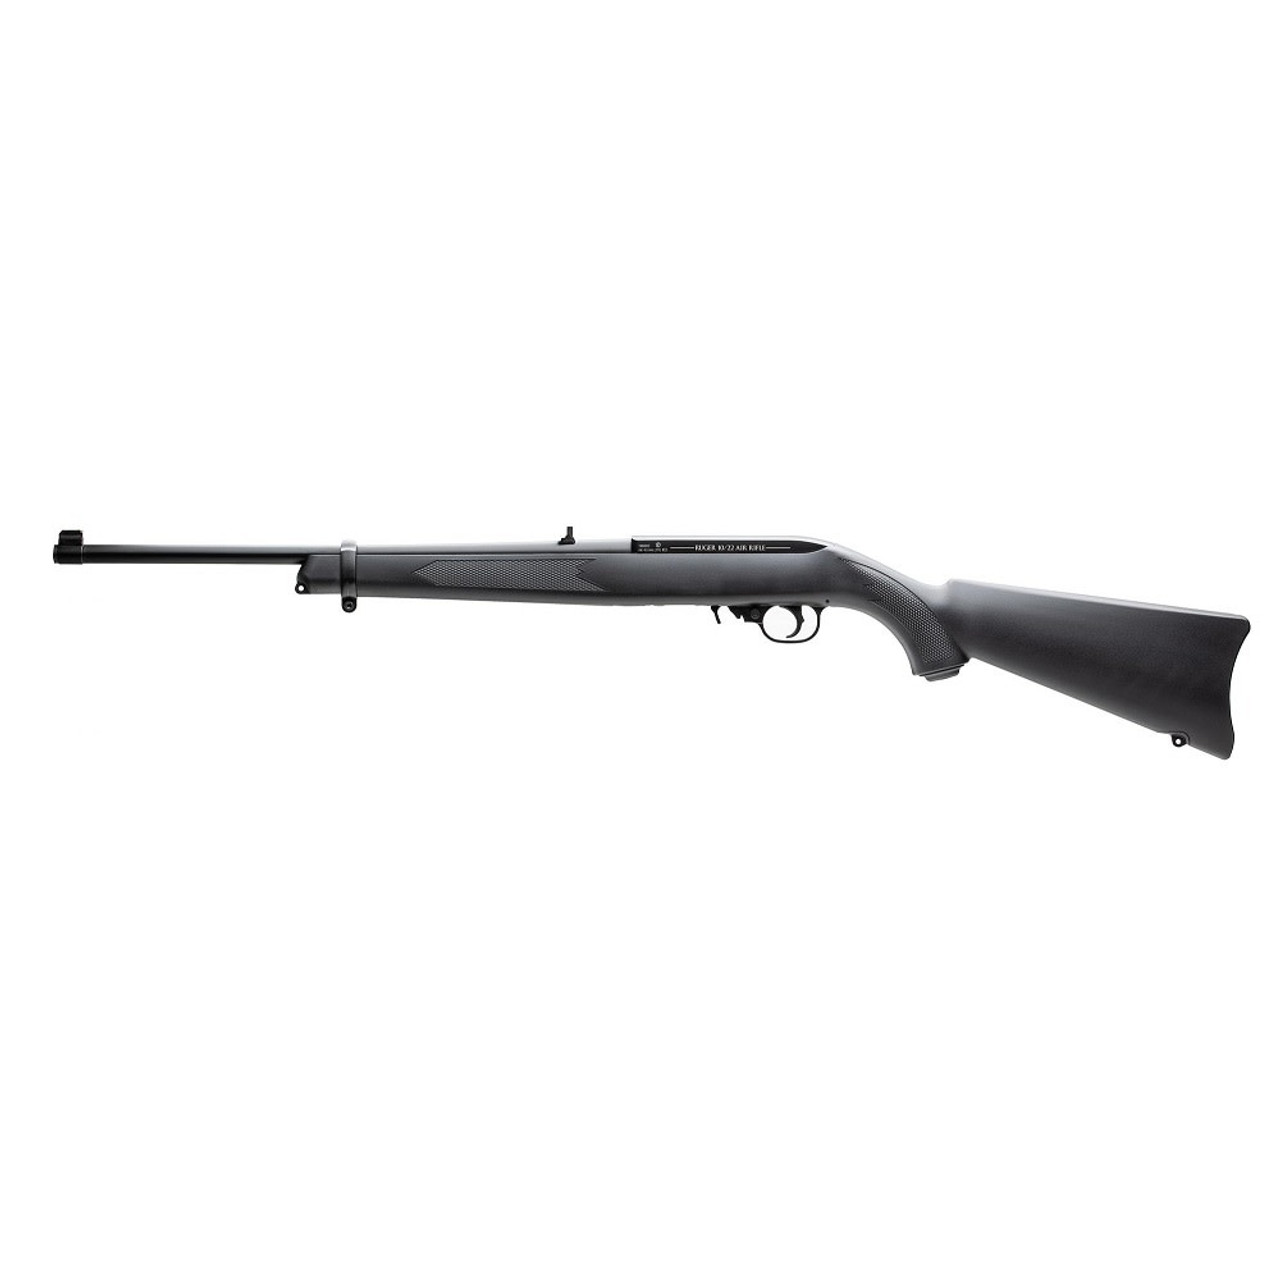 The .22lr Ruger 10/22 has been a top seller since the 1960s: well-balanced, robust and precision-built. The .177-caliber CO₂ version (2 x 12 g) from Umarex, which shoots pellets, likewise has what it takes to become a classic.

